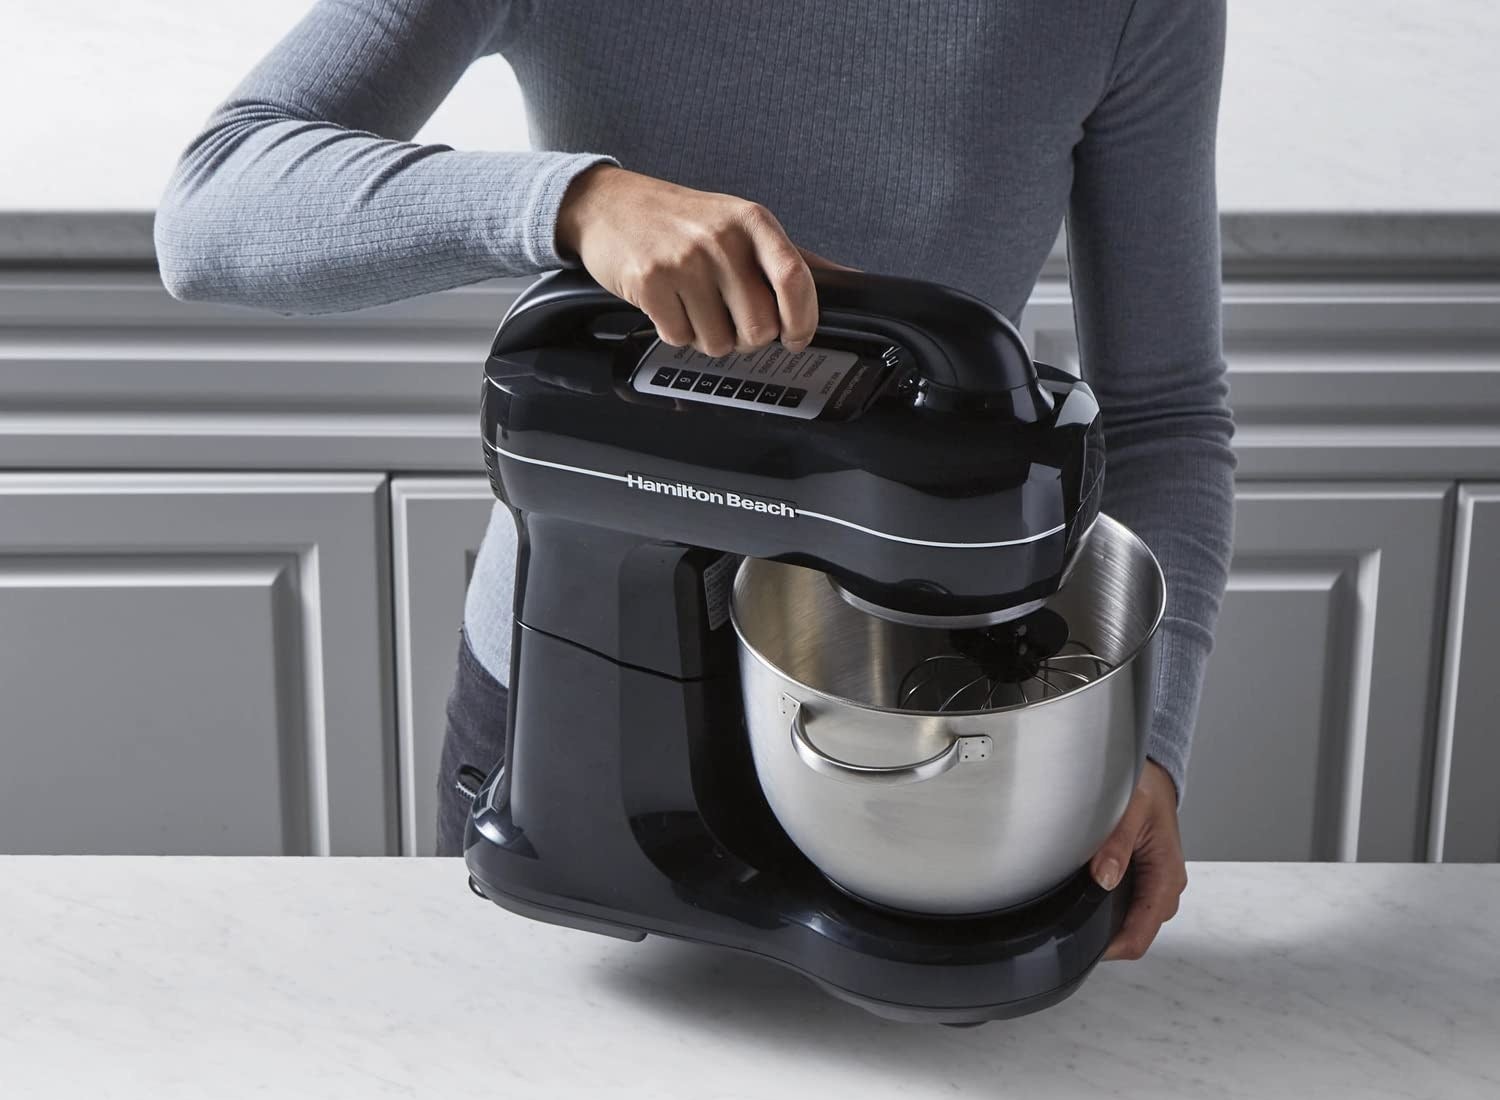 A person using the stand mixer